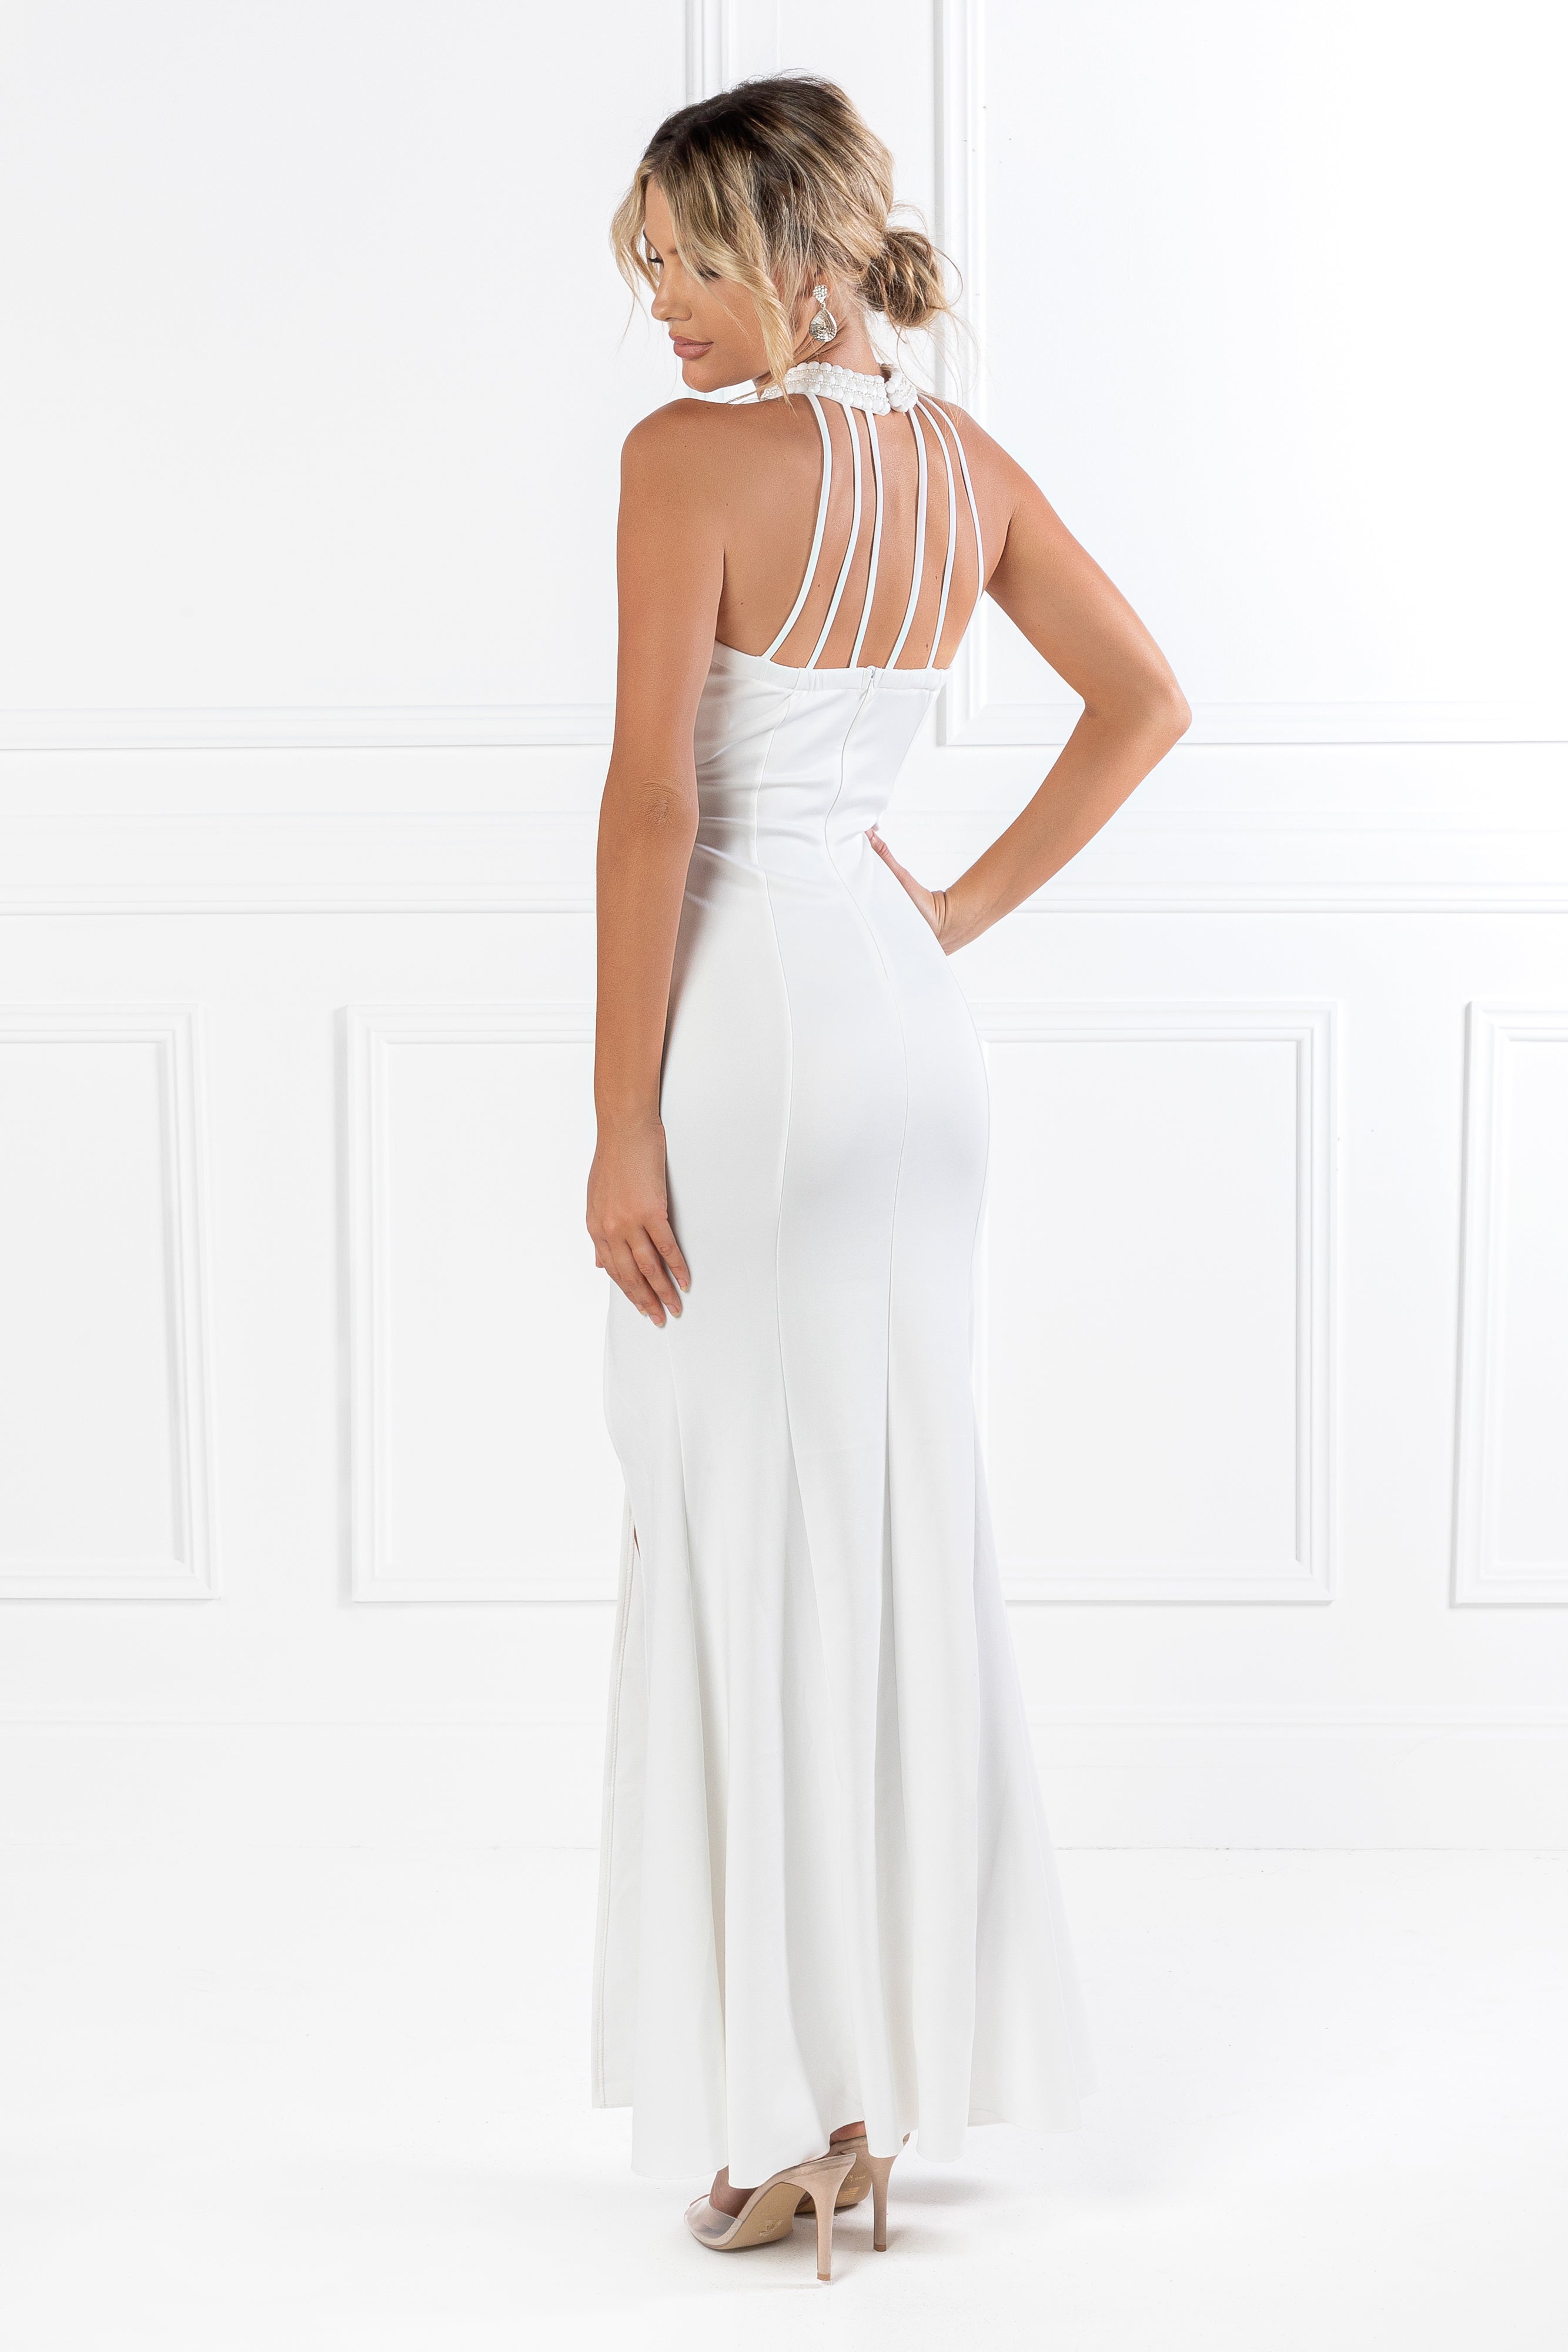 Honey Couture VALERIA White Beaded Halter Formal Gown {vendor} AfterPay Humm ZipPay LayBuy Sezzle